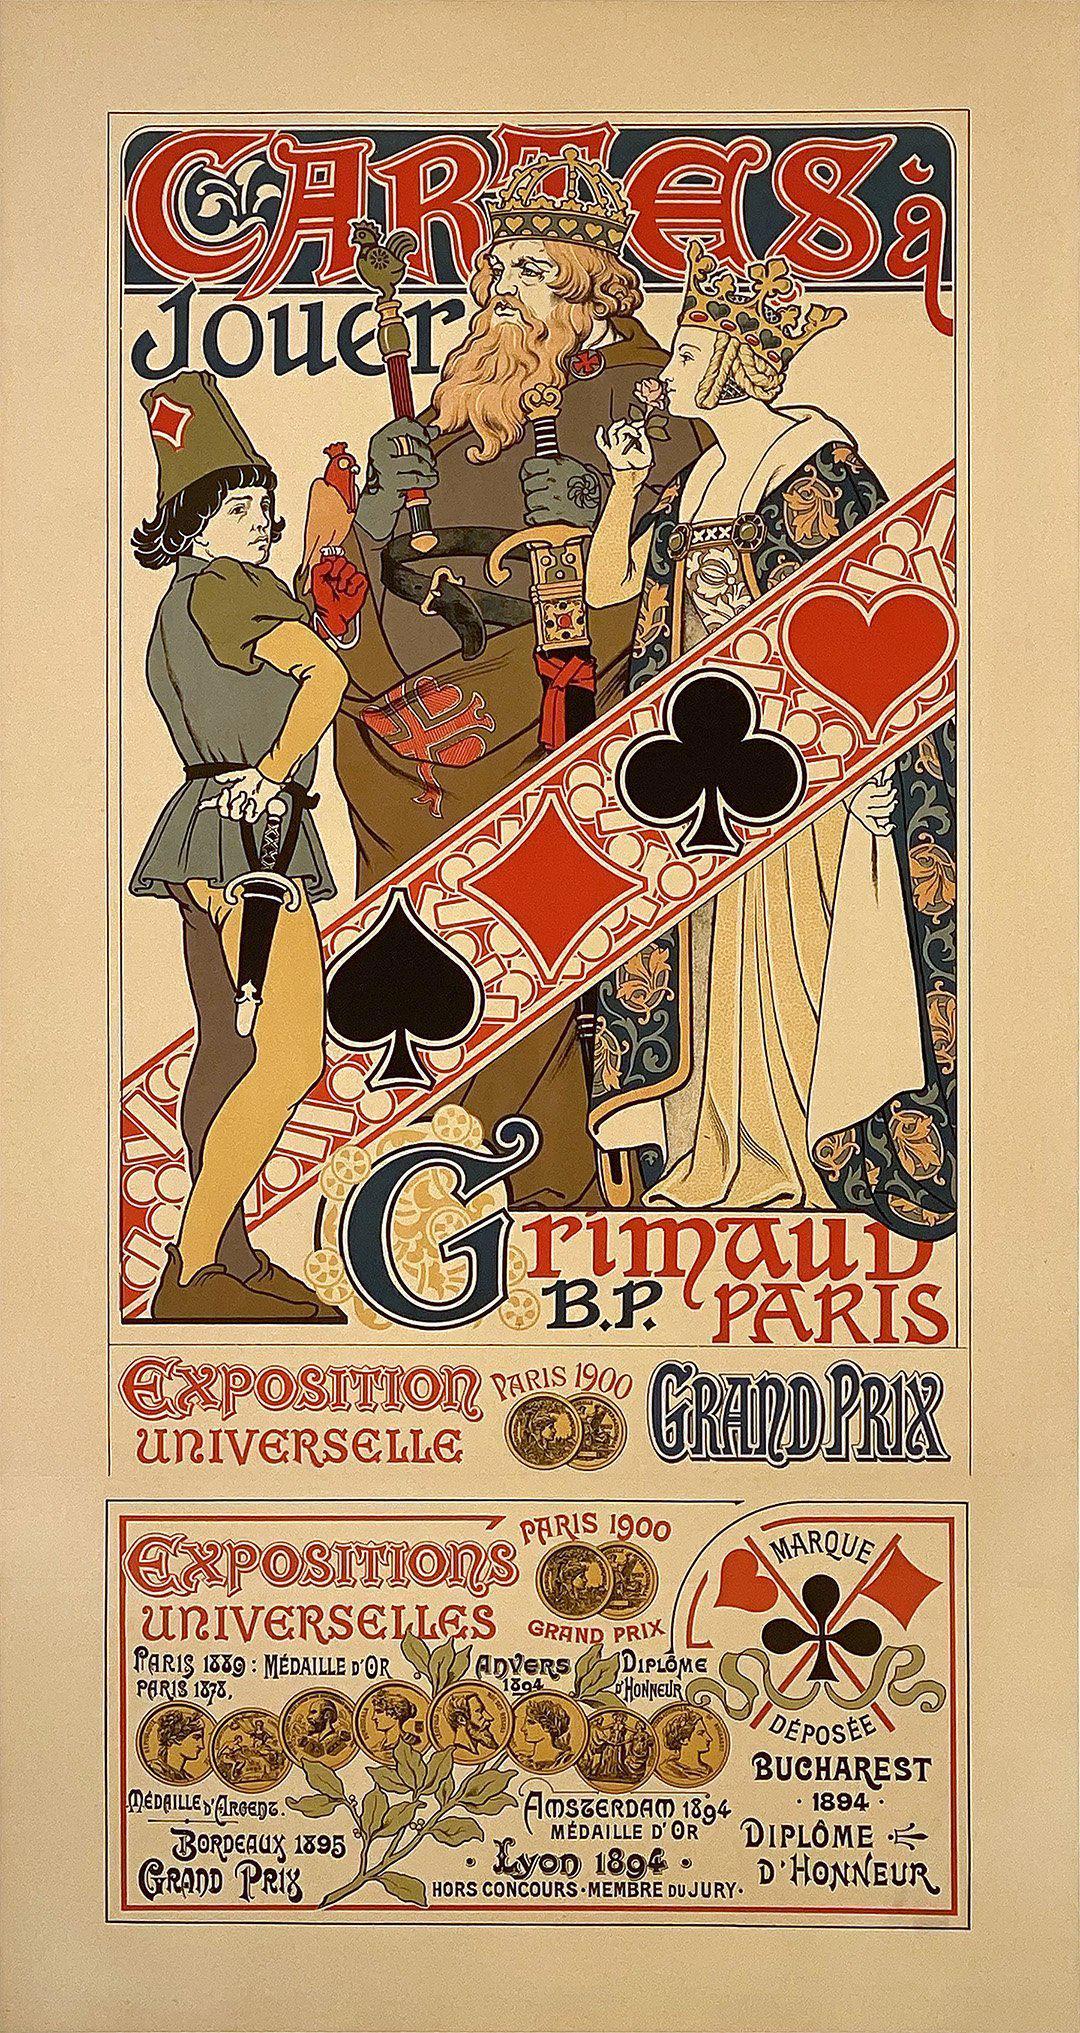 Original Cartes a Jouer Playing Cards Poster by Quenioux for the Unversal Exposition of 1900